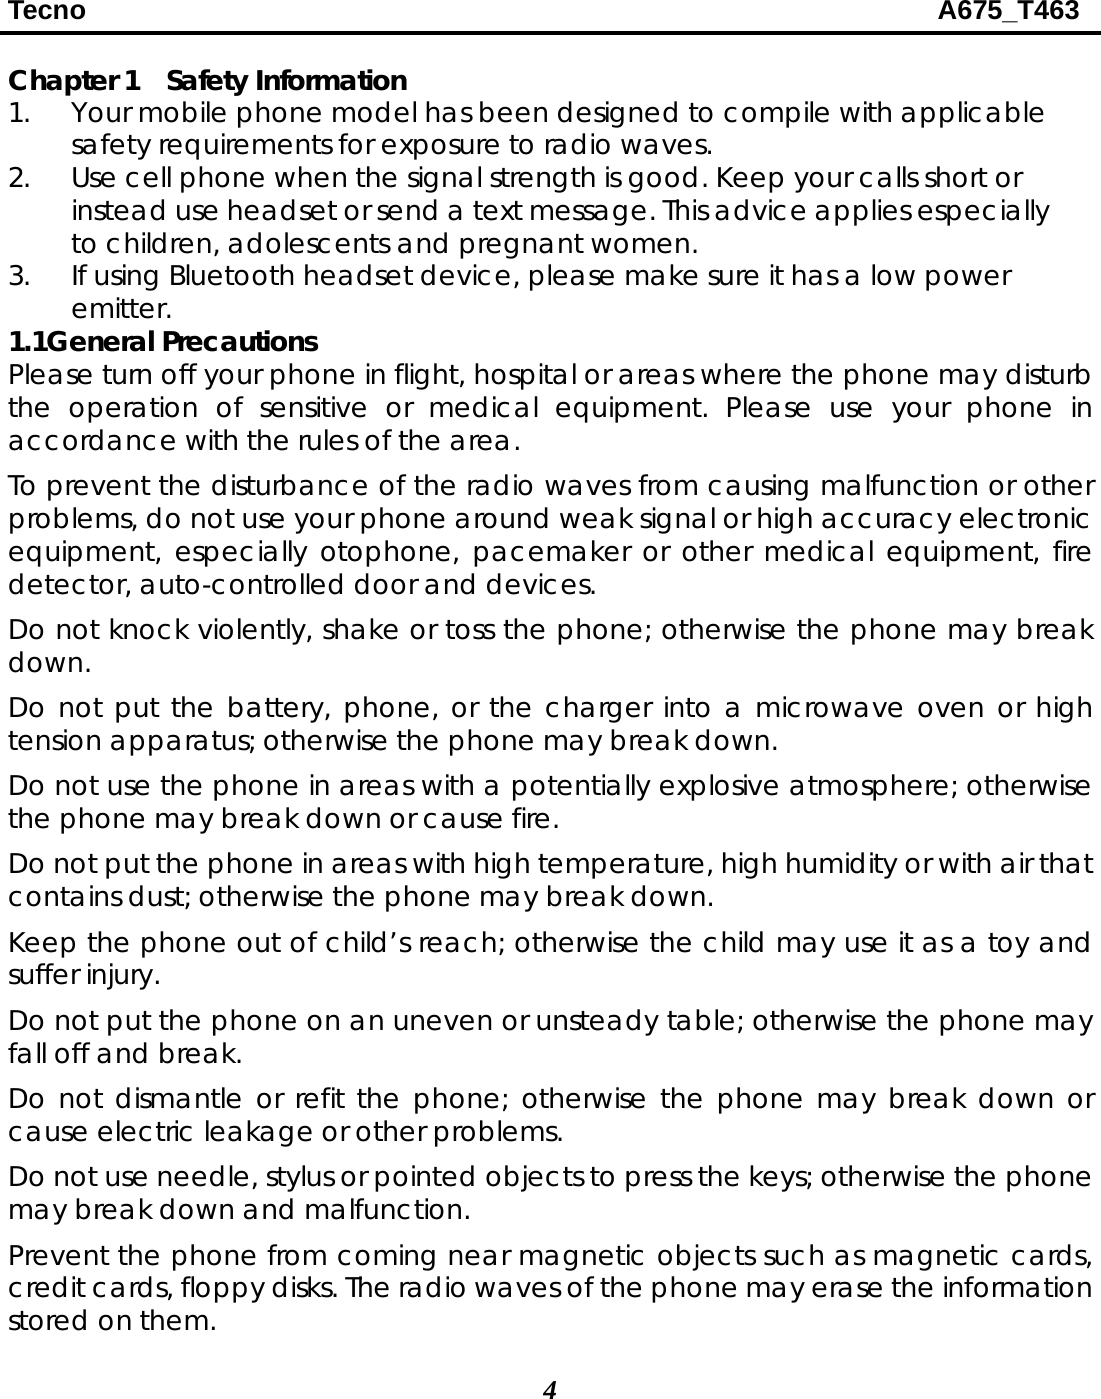 Tecno                                                              A675_T463 4  Chapter 1    Safety Information 1. Your mobile phone model has been designed to compile with applicable safety requirements for exposure to radio waves.   2. Use cell phone when the signal strength is good. Keep your calls short or instead use headset or send a text message. This advice applies especially to children, adolescents and pregnant women. 3. If using Bluetooth headset device, please make sure it has a low power emitter. 1.1General Precautions Please turn off your phone in flight, hospital or areas where the phone may disturb the operation of sensitive or medical equipment. Please use your phone in accordance with the rules of the area. To prevent the disturbance of the radio waves from causing malfunction or other problems, do not use your phone around weak signal or high accuracy electronic equipment, especially otophone, pacemaker or other medical equipment, fire detector, auto-controlled door and devices. Do not knock violently, shake or toss the phone; otherwise the phone may break down. Do not put the battery, phone, or the charger into a microwave oven or high tension apparatus; otherwise the phone may break down. Do not use the phone in areas with a potentially explosive atmosphere; otherwise the phone may break down or cause fire. Do not put the phone in areas with high temperature, high humidity or with air that contains dust; otherwise the phone may break down. Keep the phone out of child’s reach; otherwise the child may use it as a toy and suffer injury. Do not put the phone on an uneven or unsteady table; otherwise the phone may fall off and break. Do not dismantle or refit the phone; otherwise the phone may break down or cause electric leakage or other problems. Do not use needle, stylus or pointed objects to press the keys; otherwise the phone may break down and malfunction. Prevent the phone from coming near magnetic objects such as magnetic cards, credit cards, floppy disks. The radio waves of the phone may erase the information stored on them. 